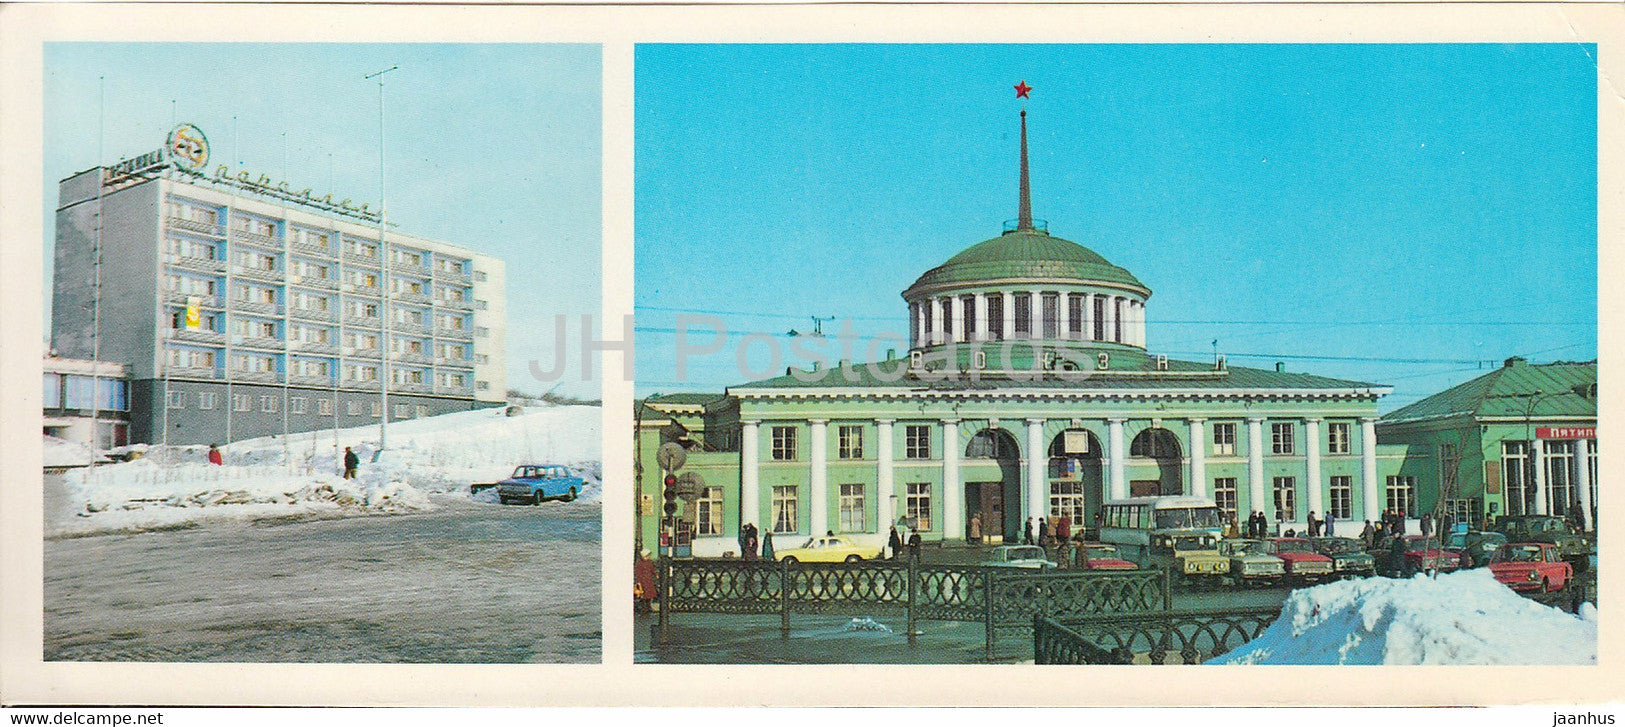 Murmansk - hotel 69 Parallel - Railway Station - 1981 - Russia USSR - used - JH Postcards